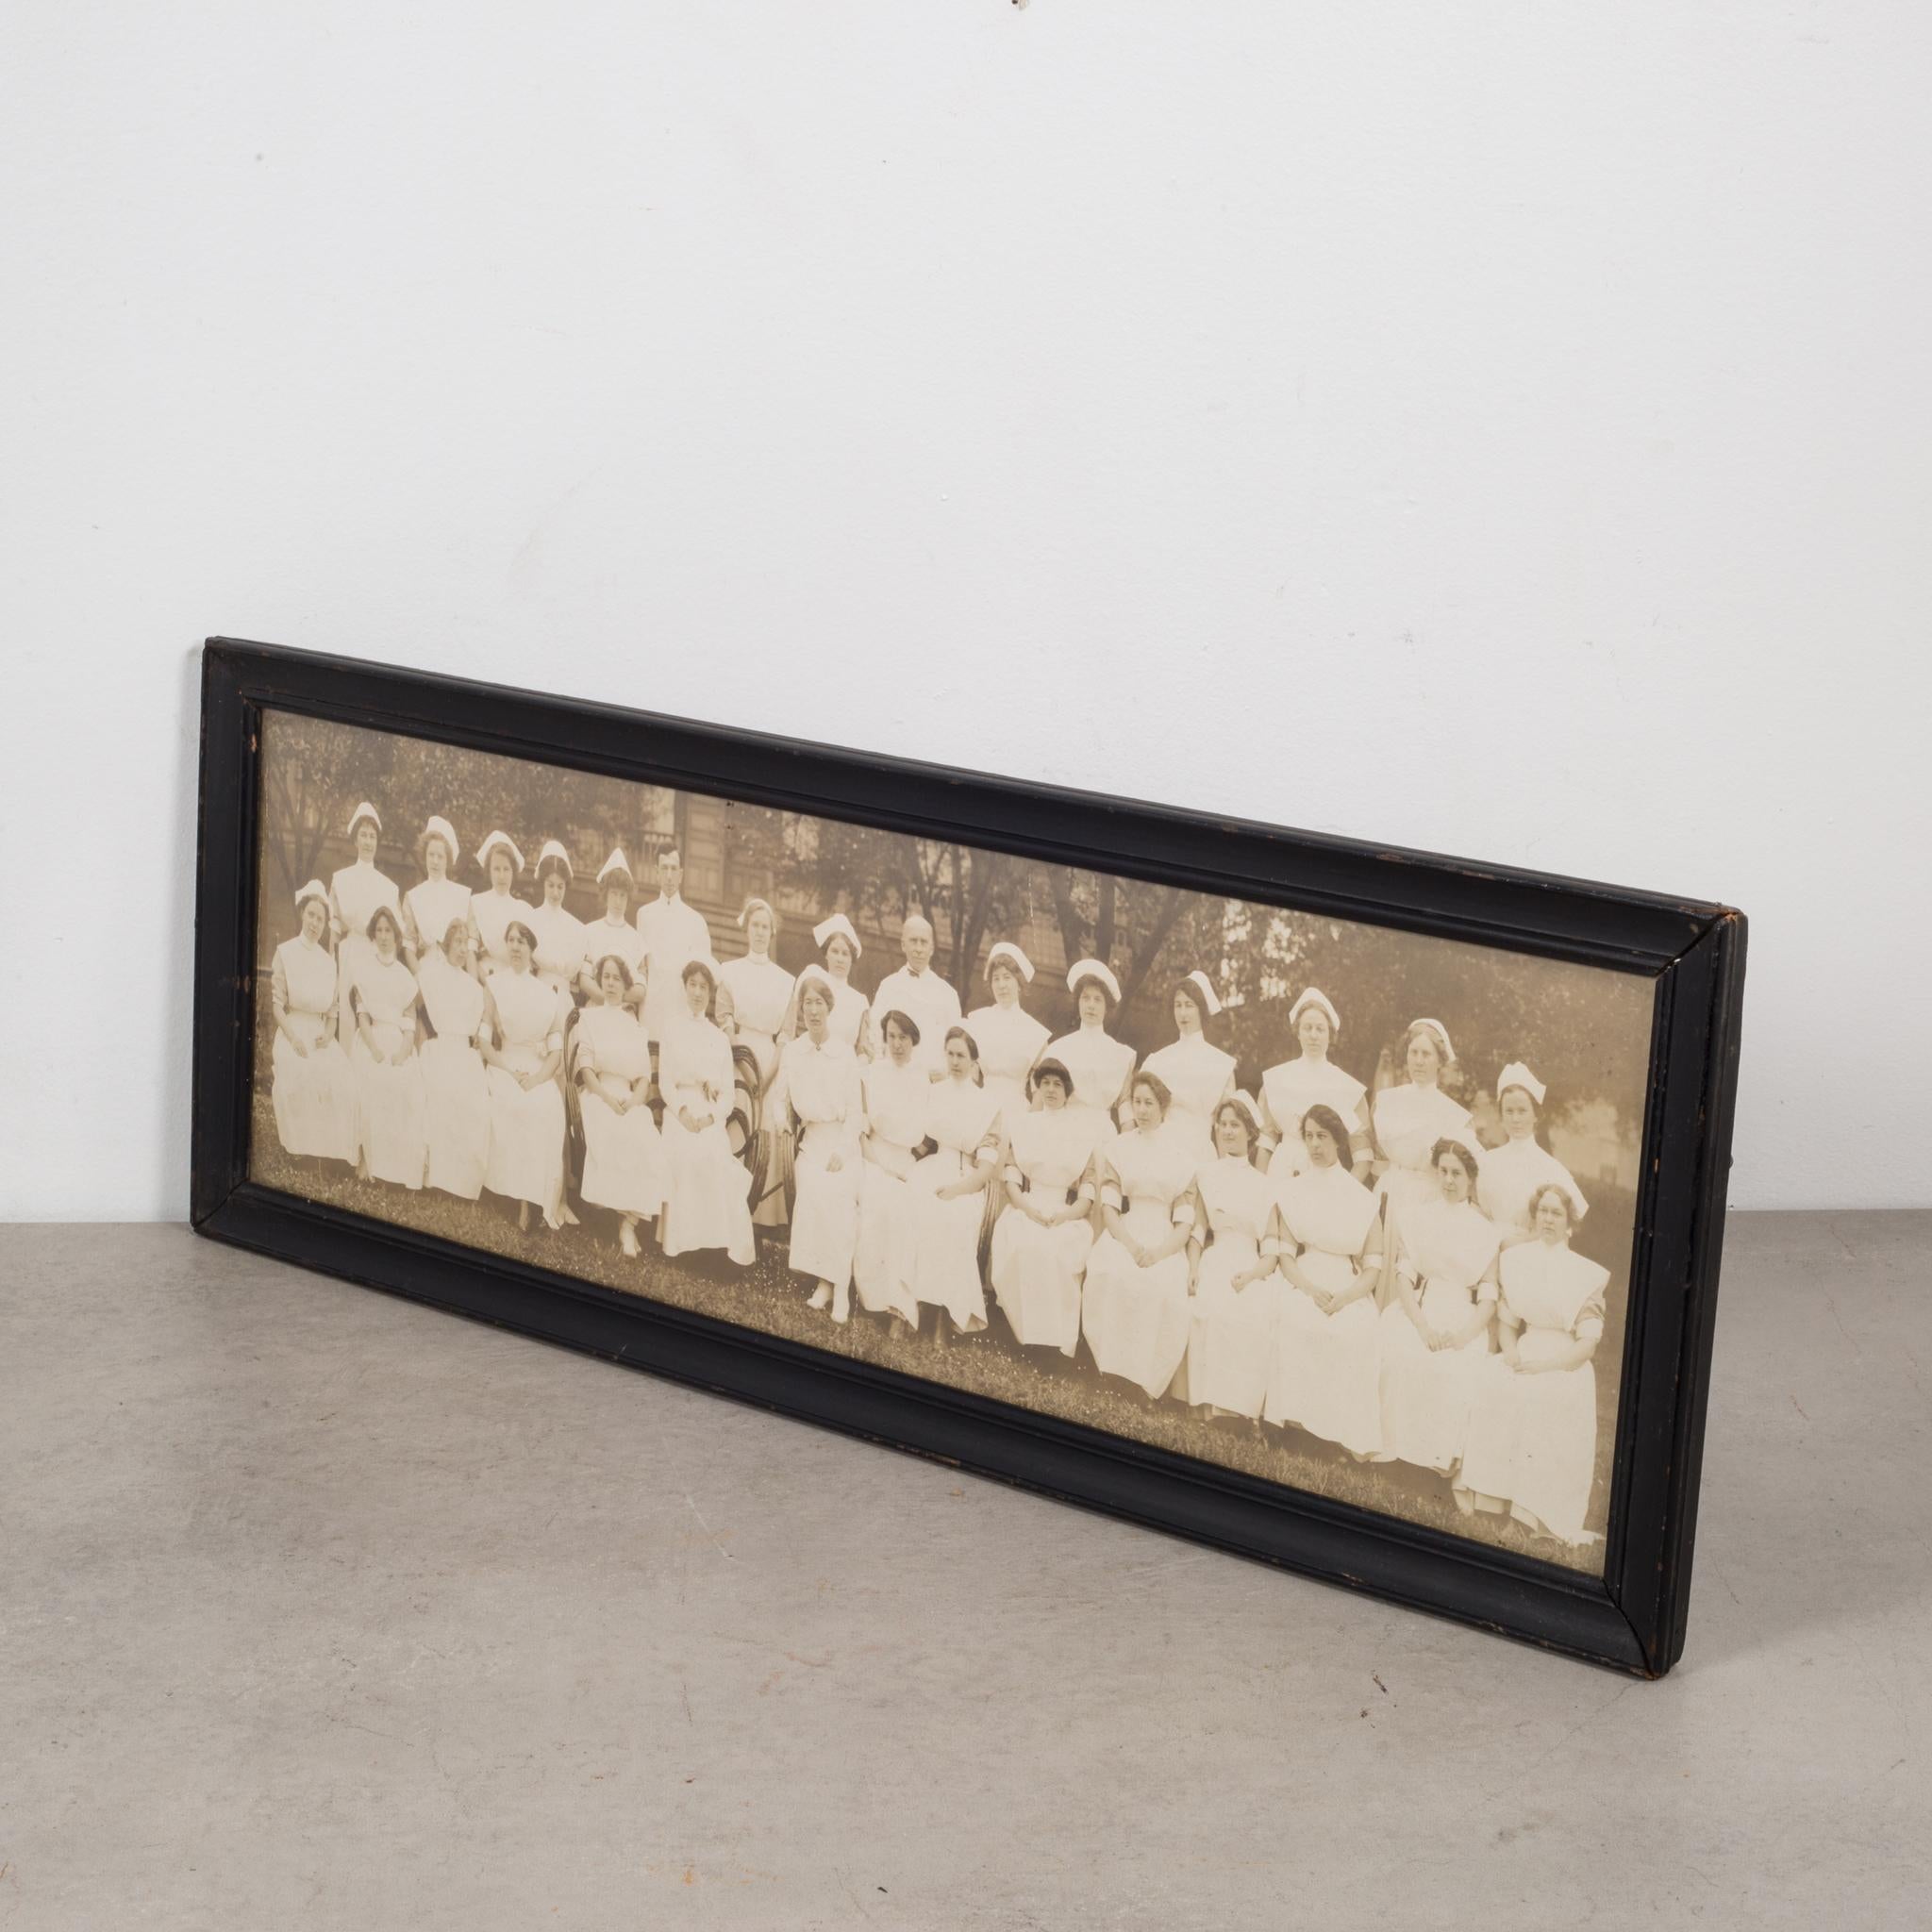 ABOUT

An original panoramic photo of a group of mostly nurses and two doctors. The photo is black and white and framed in the original wooden frame. The picture has faded somewhat. The frame is in good condition with minor wear and the appropriate